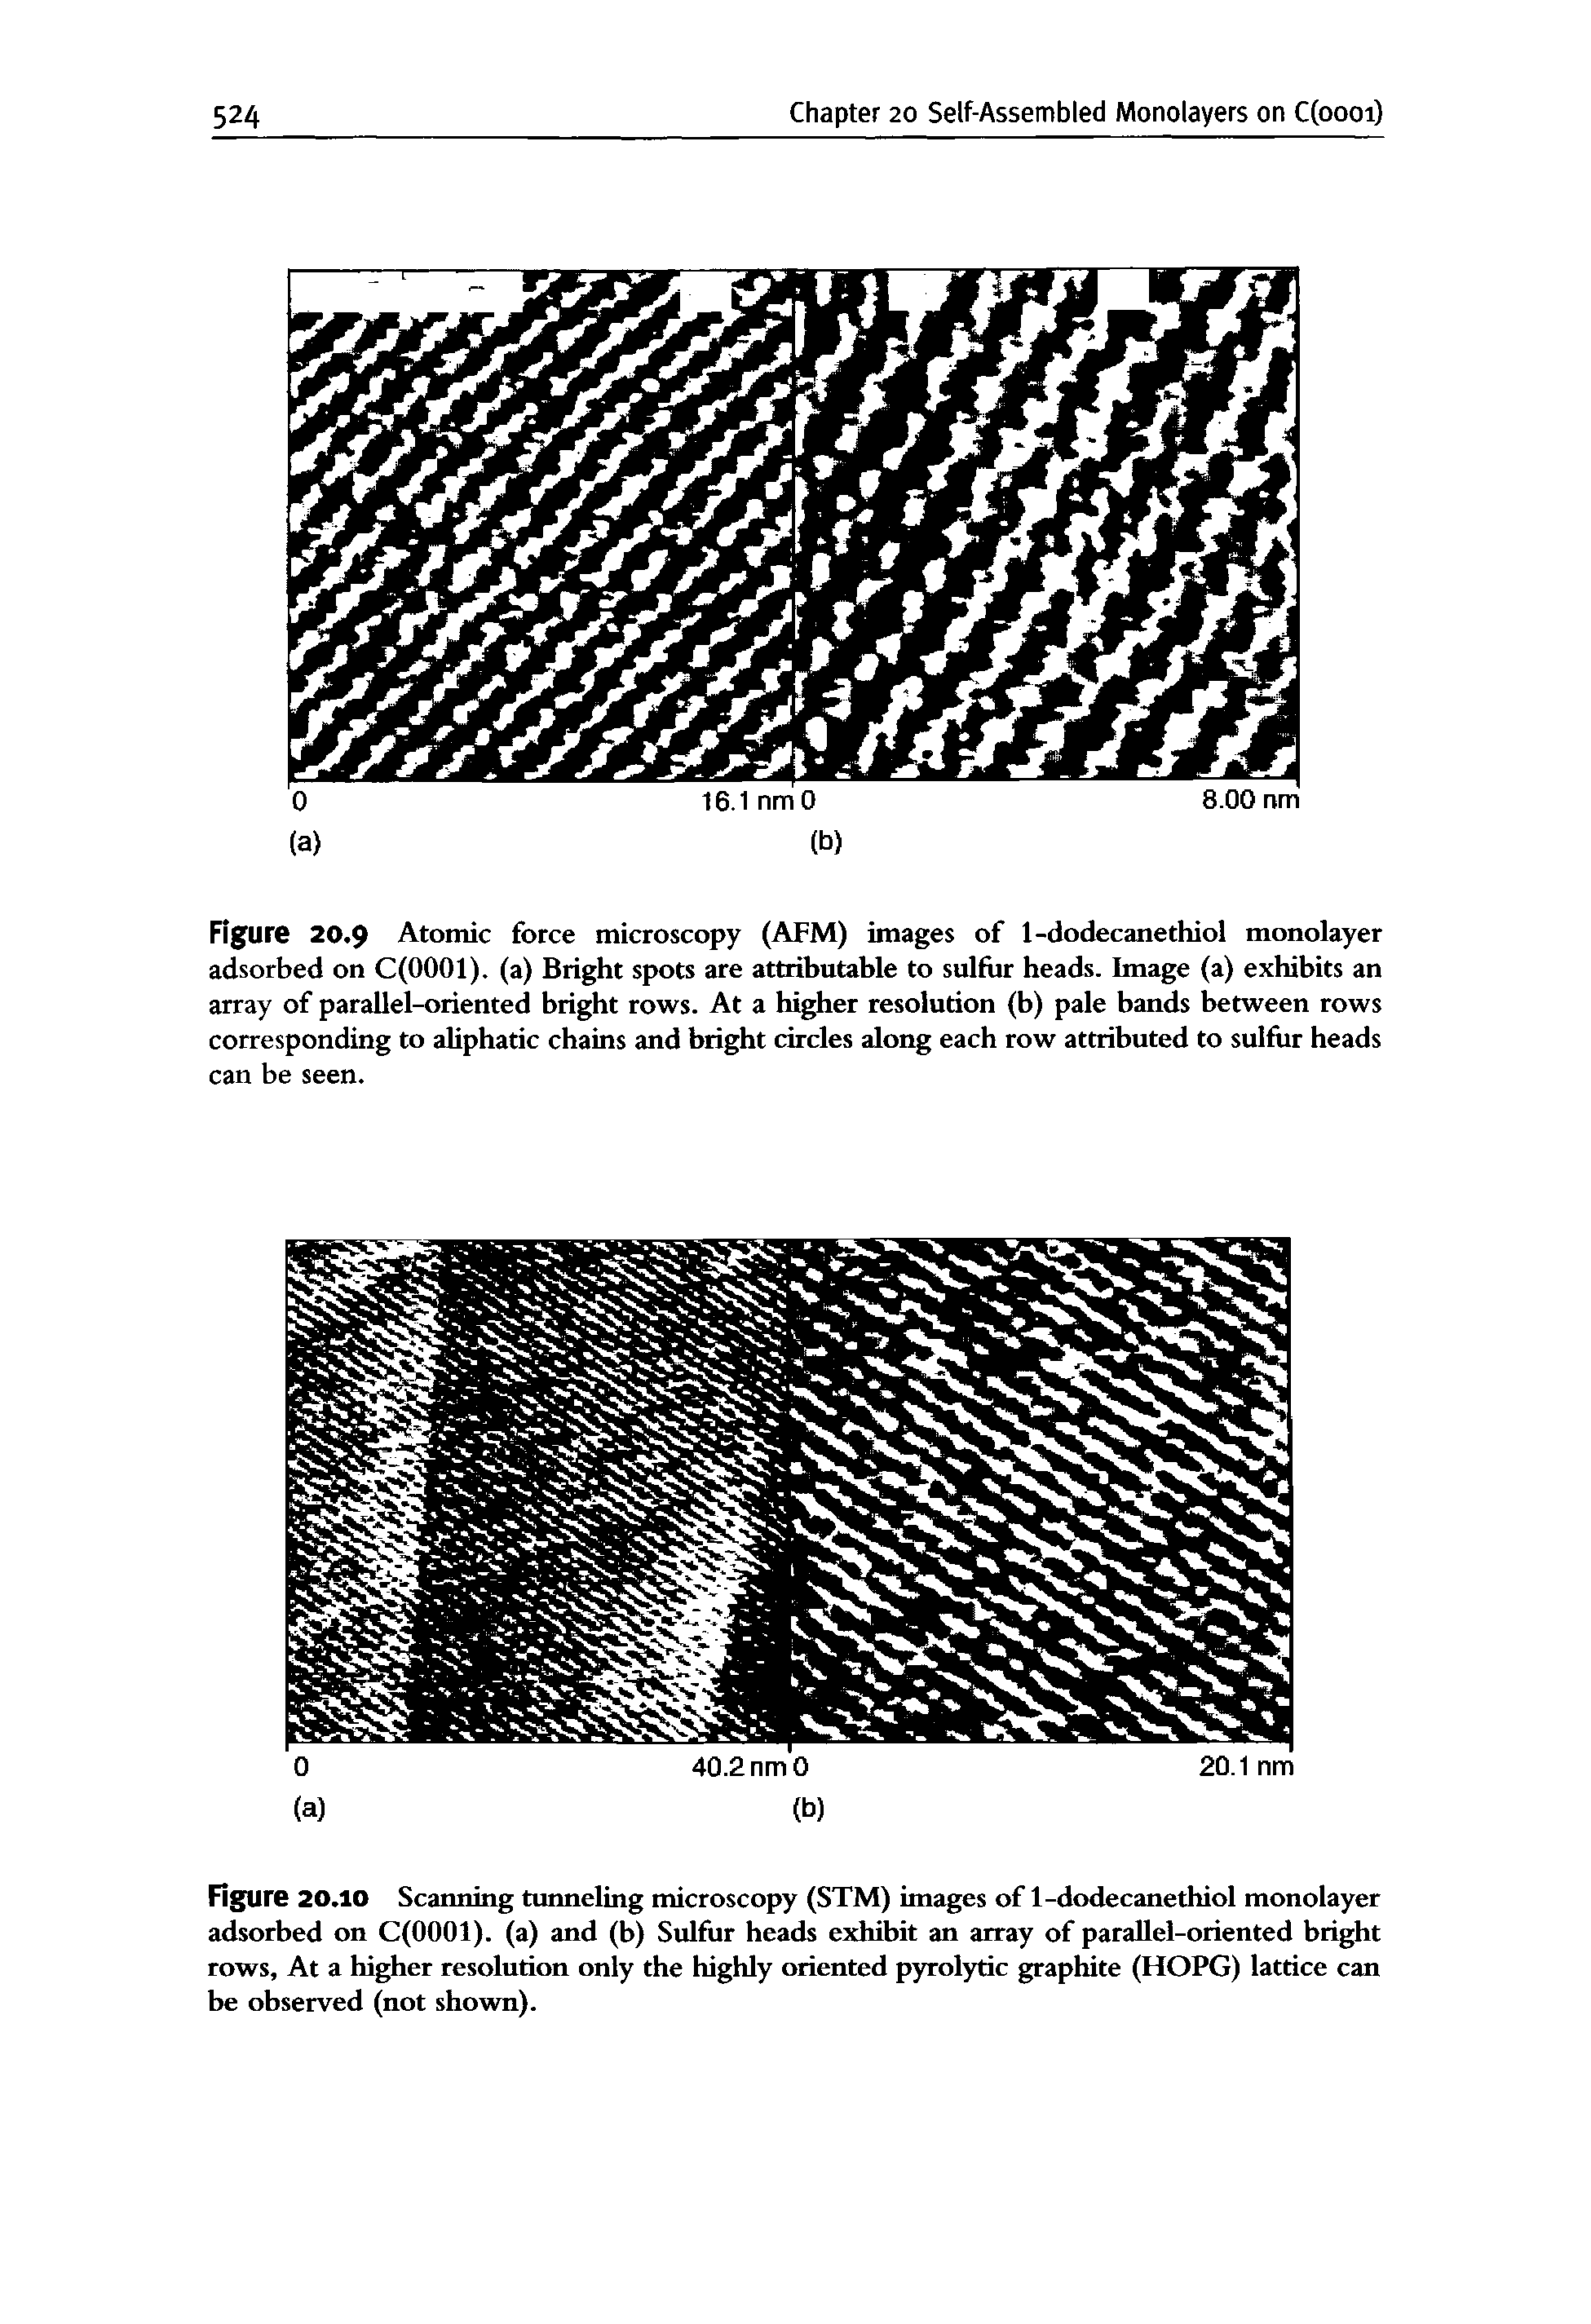 Figure 20.9 Atomic force microscopy (AFM) images of 1-dodecanethiol monolayer adsorbed on C(OOOl). (a) Bright spots are attributable to sulfur heads. Image (a) exhibits an array of parallel-oriented bright rows. At a higher resolution (b) pale bands between rows corresponding to ahphatic chains and bright circles along each row attributed to sulfur heads can be seen.